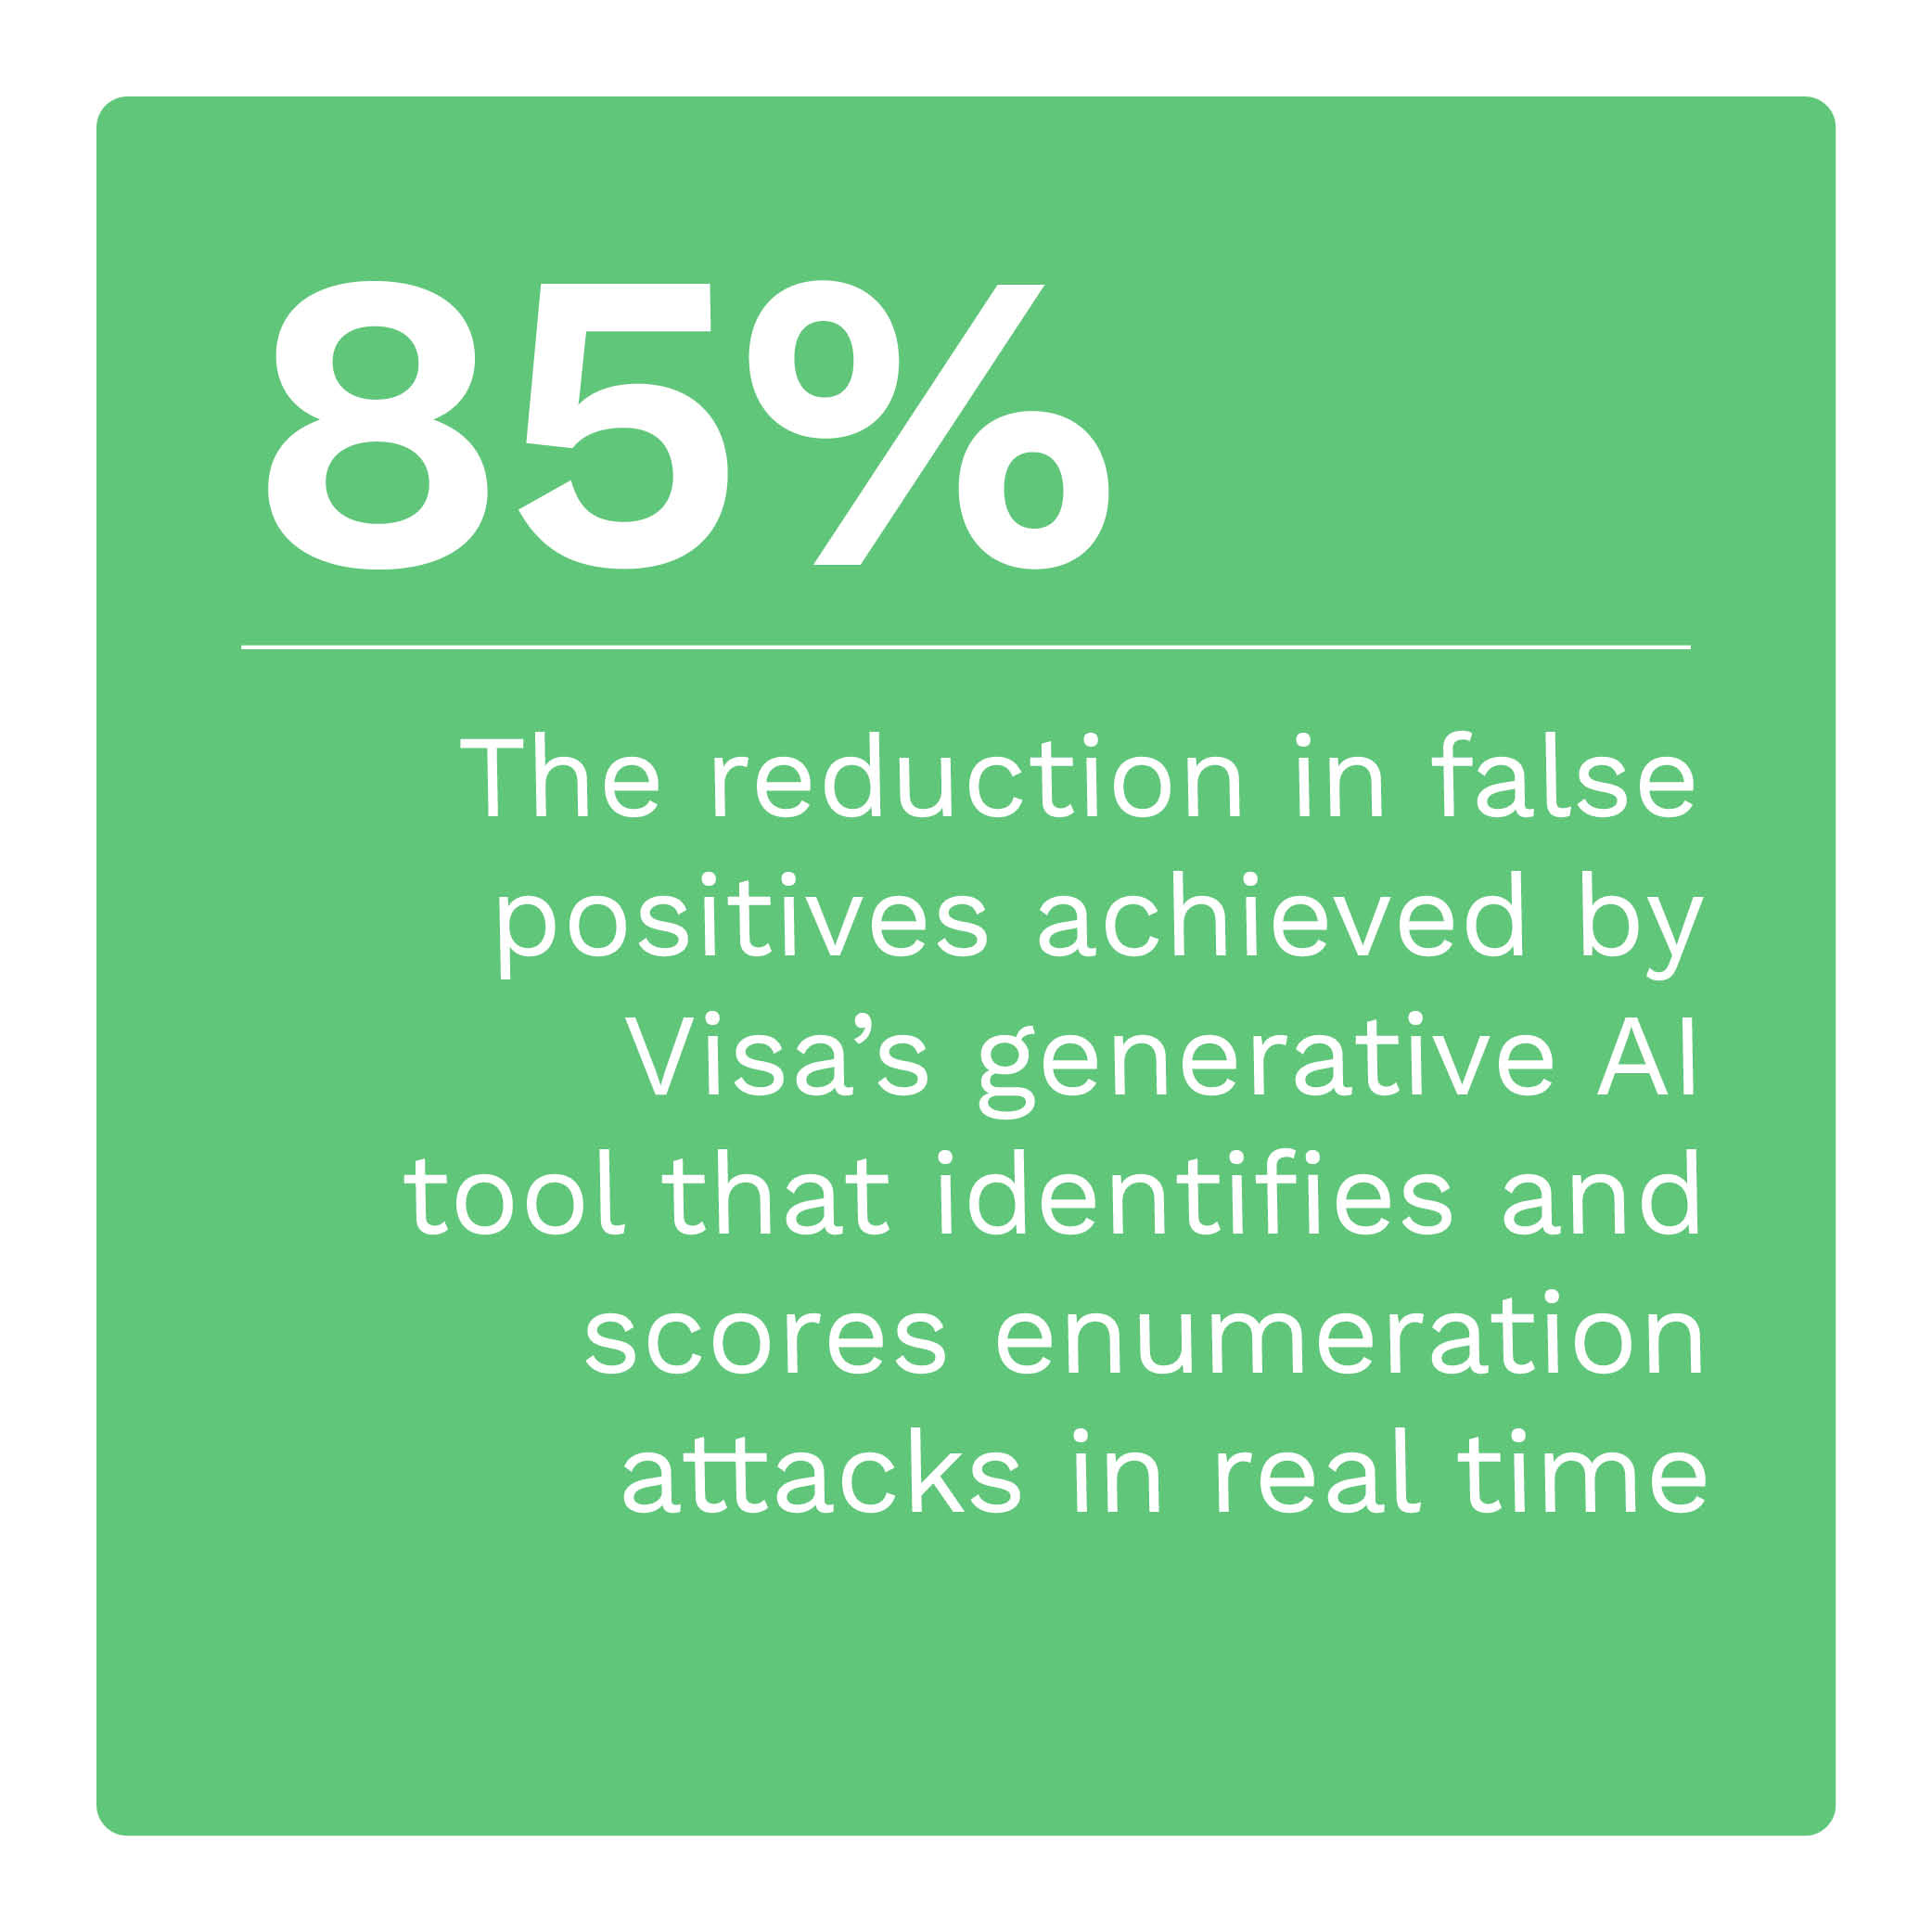 85%: The reduction in false positives achieved by Visa’s generative AI tool that identifies and scores enumeration attacks in real time